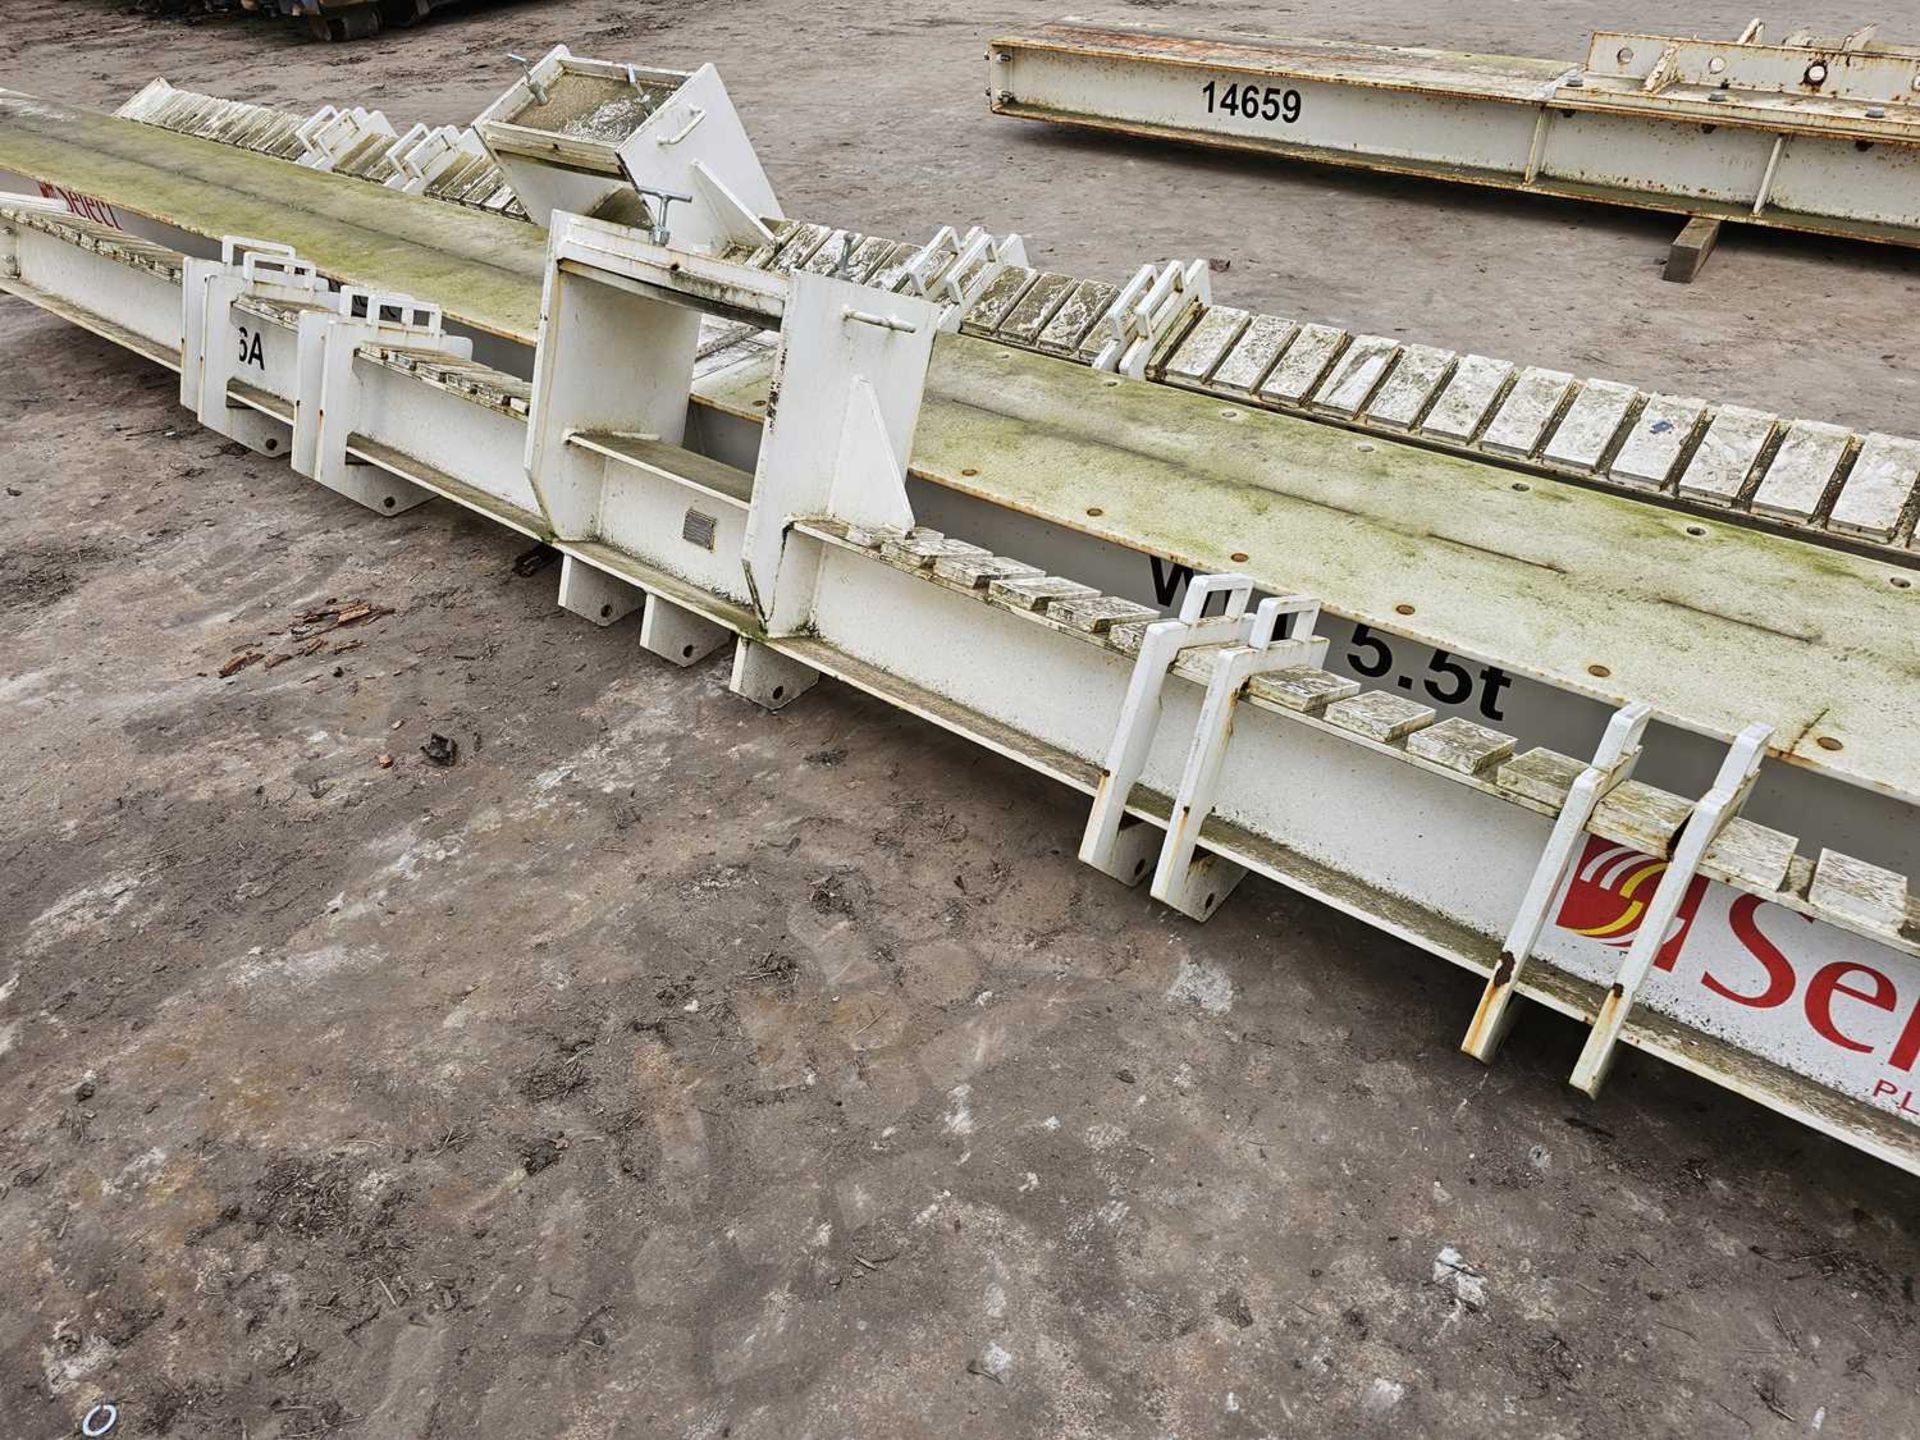 2019 Section Lift 9.7m x 5.8m Adjustable 5.5 Ton Multi Point Spreader Beam - Image 6 of 7